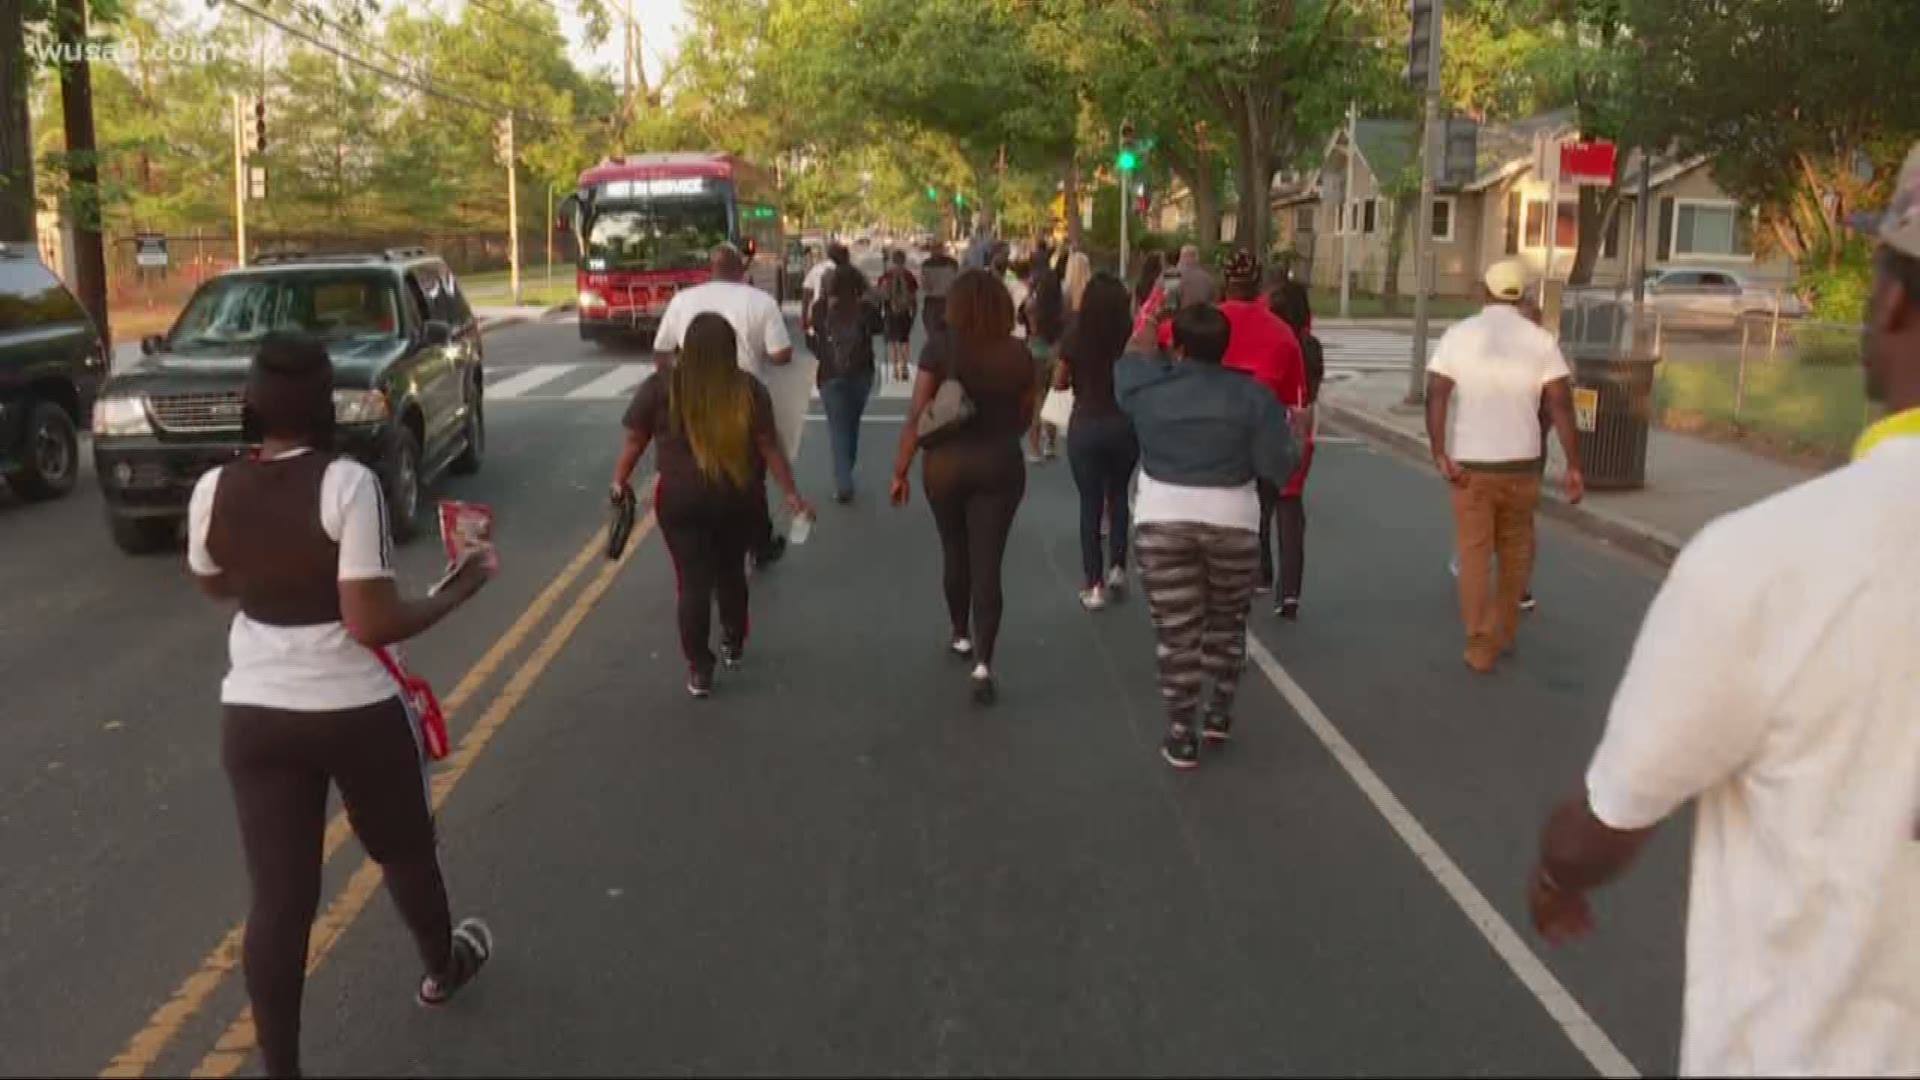 More than 50 people walked down Alabama Avenue SE in DC's Congress Heights neighborhood.